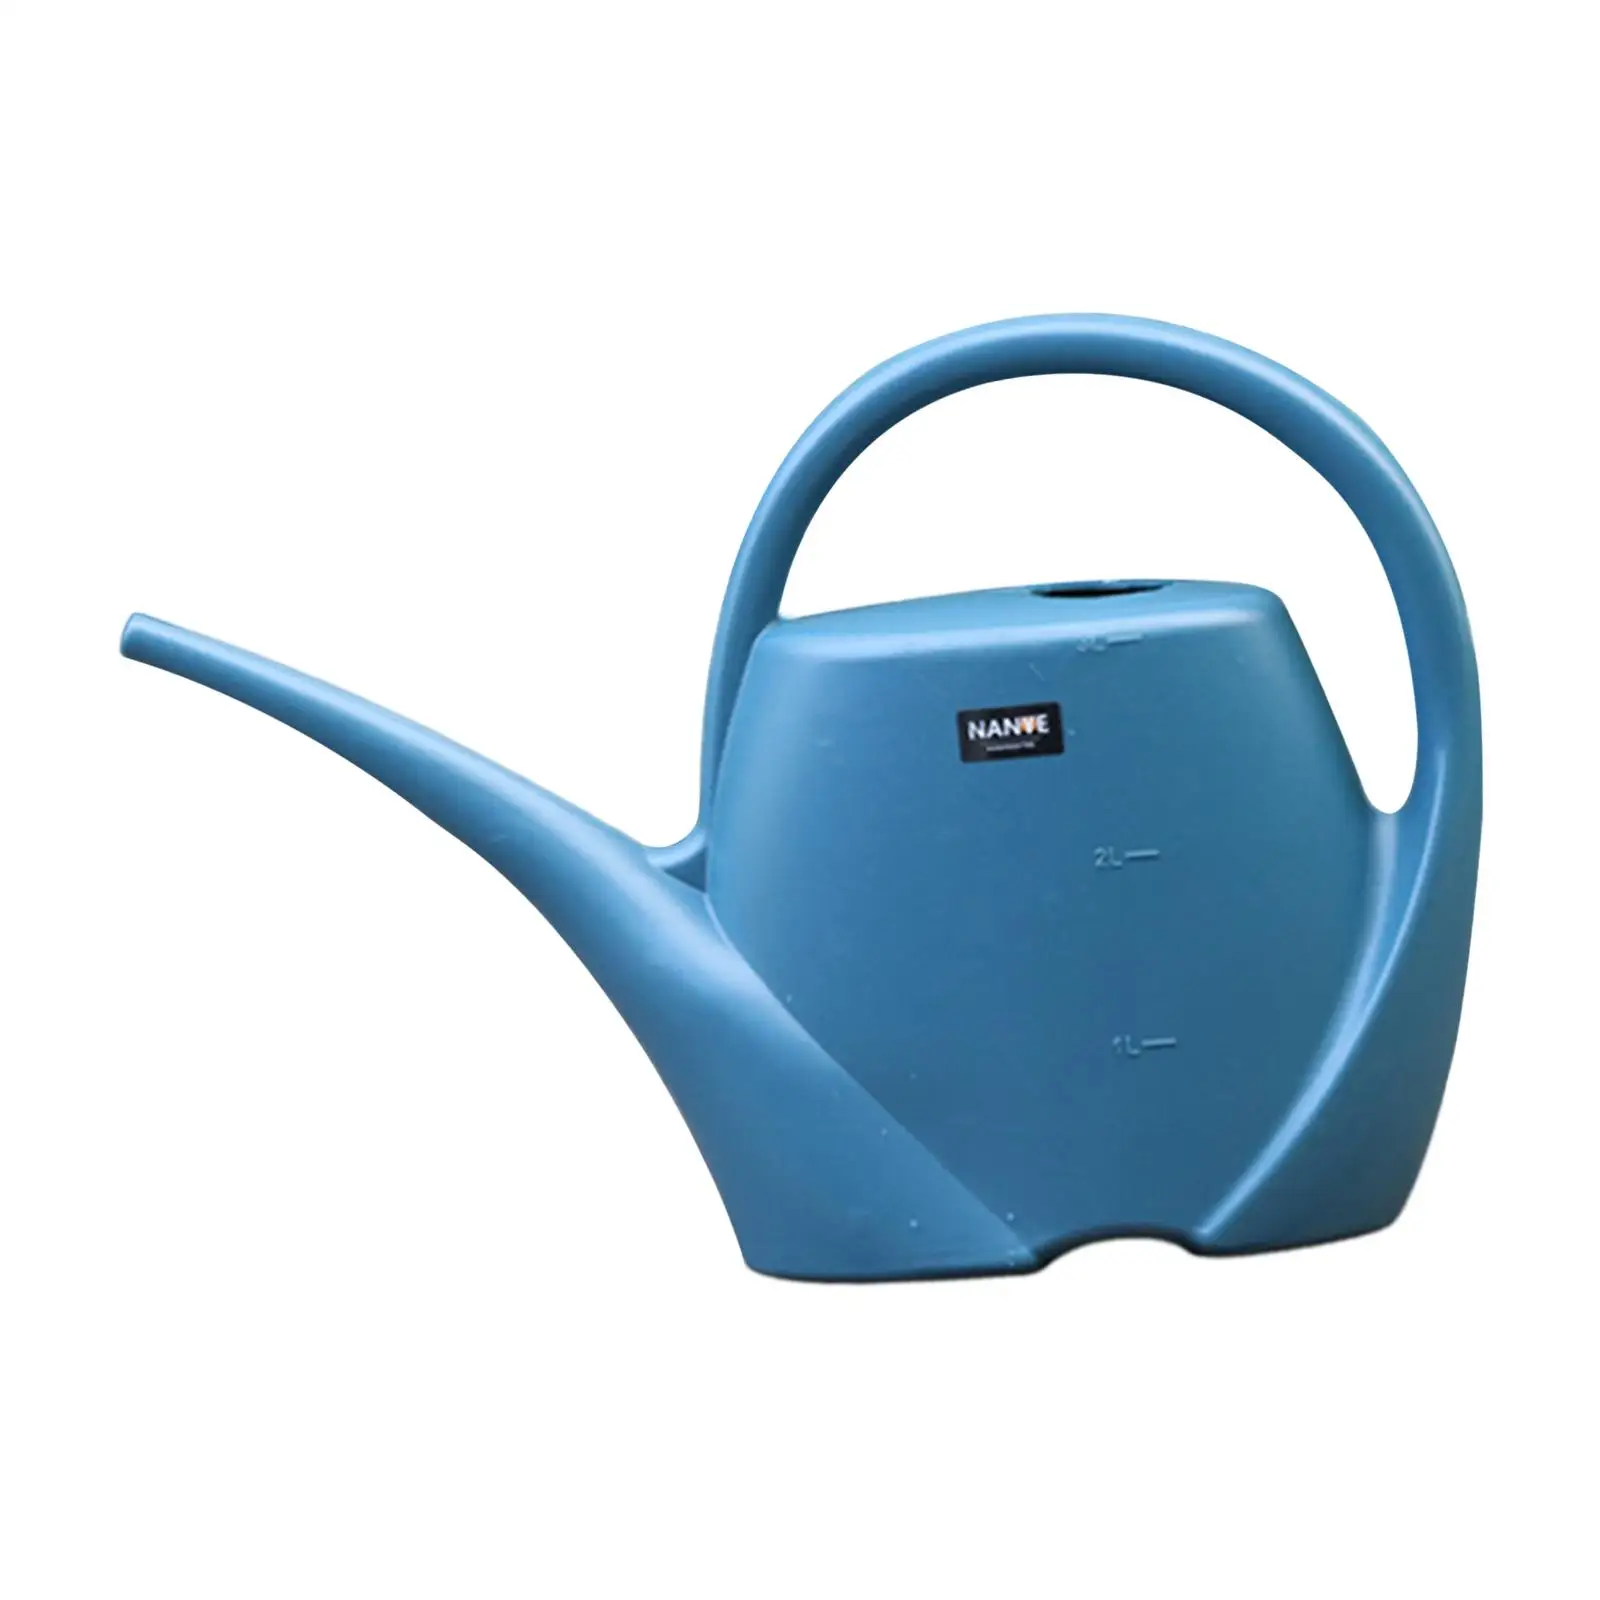 Watering Pot High Capacity Plant Pot Bottle Nonslip Durable Flower Watering Can for Home Outdoor Watering Plants Garden Flower